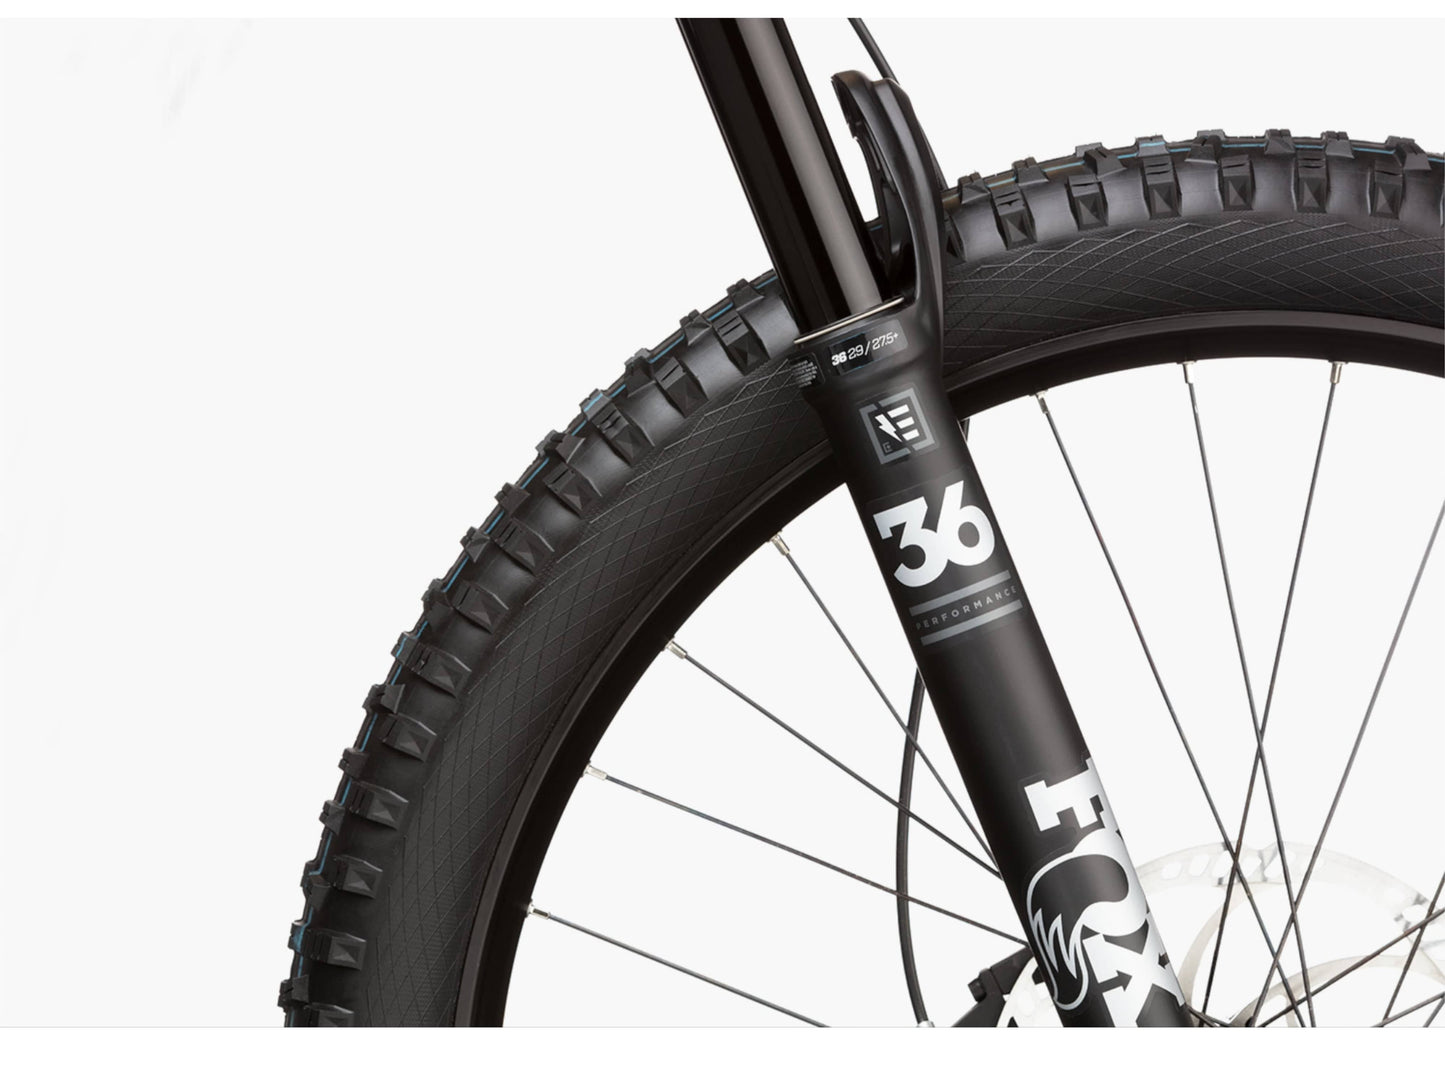 Riese and Muller Superdelite Mountain Touring emtb full suspension close up wheel.